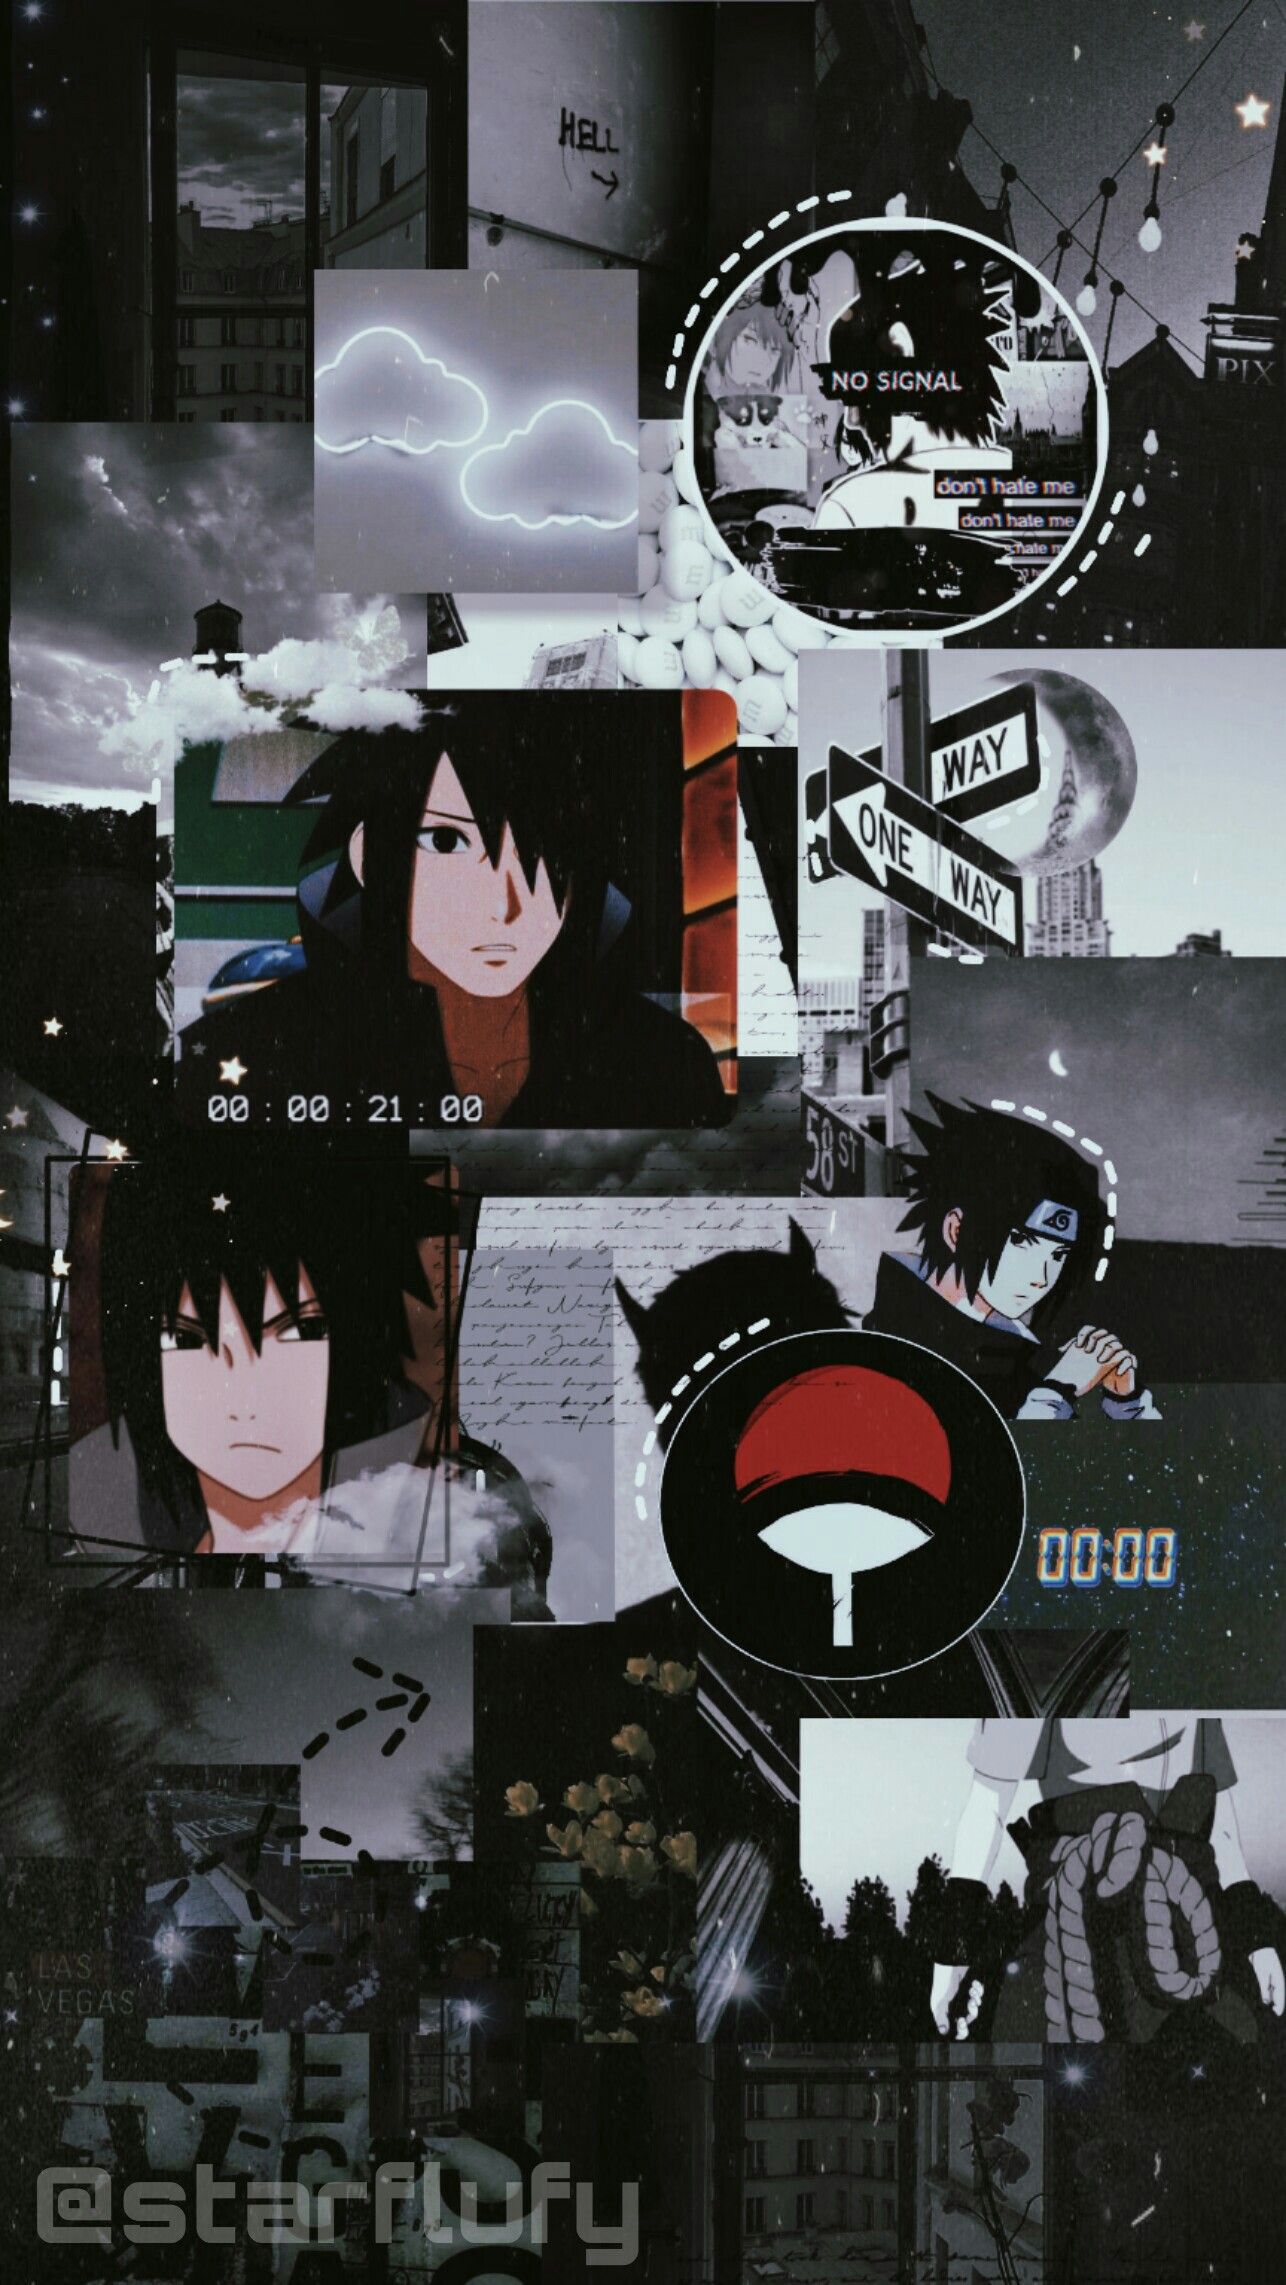 Aesthetic Naruto wallpaper made by me! Let me know if you'd like me to make one for your favorite anime! - Sasuke Uchiha